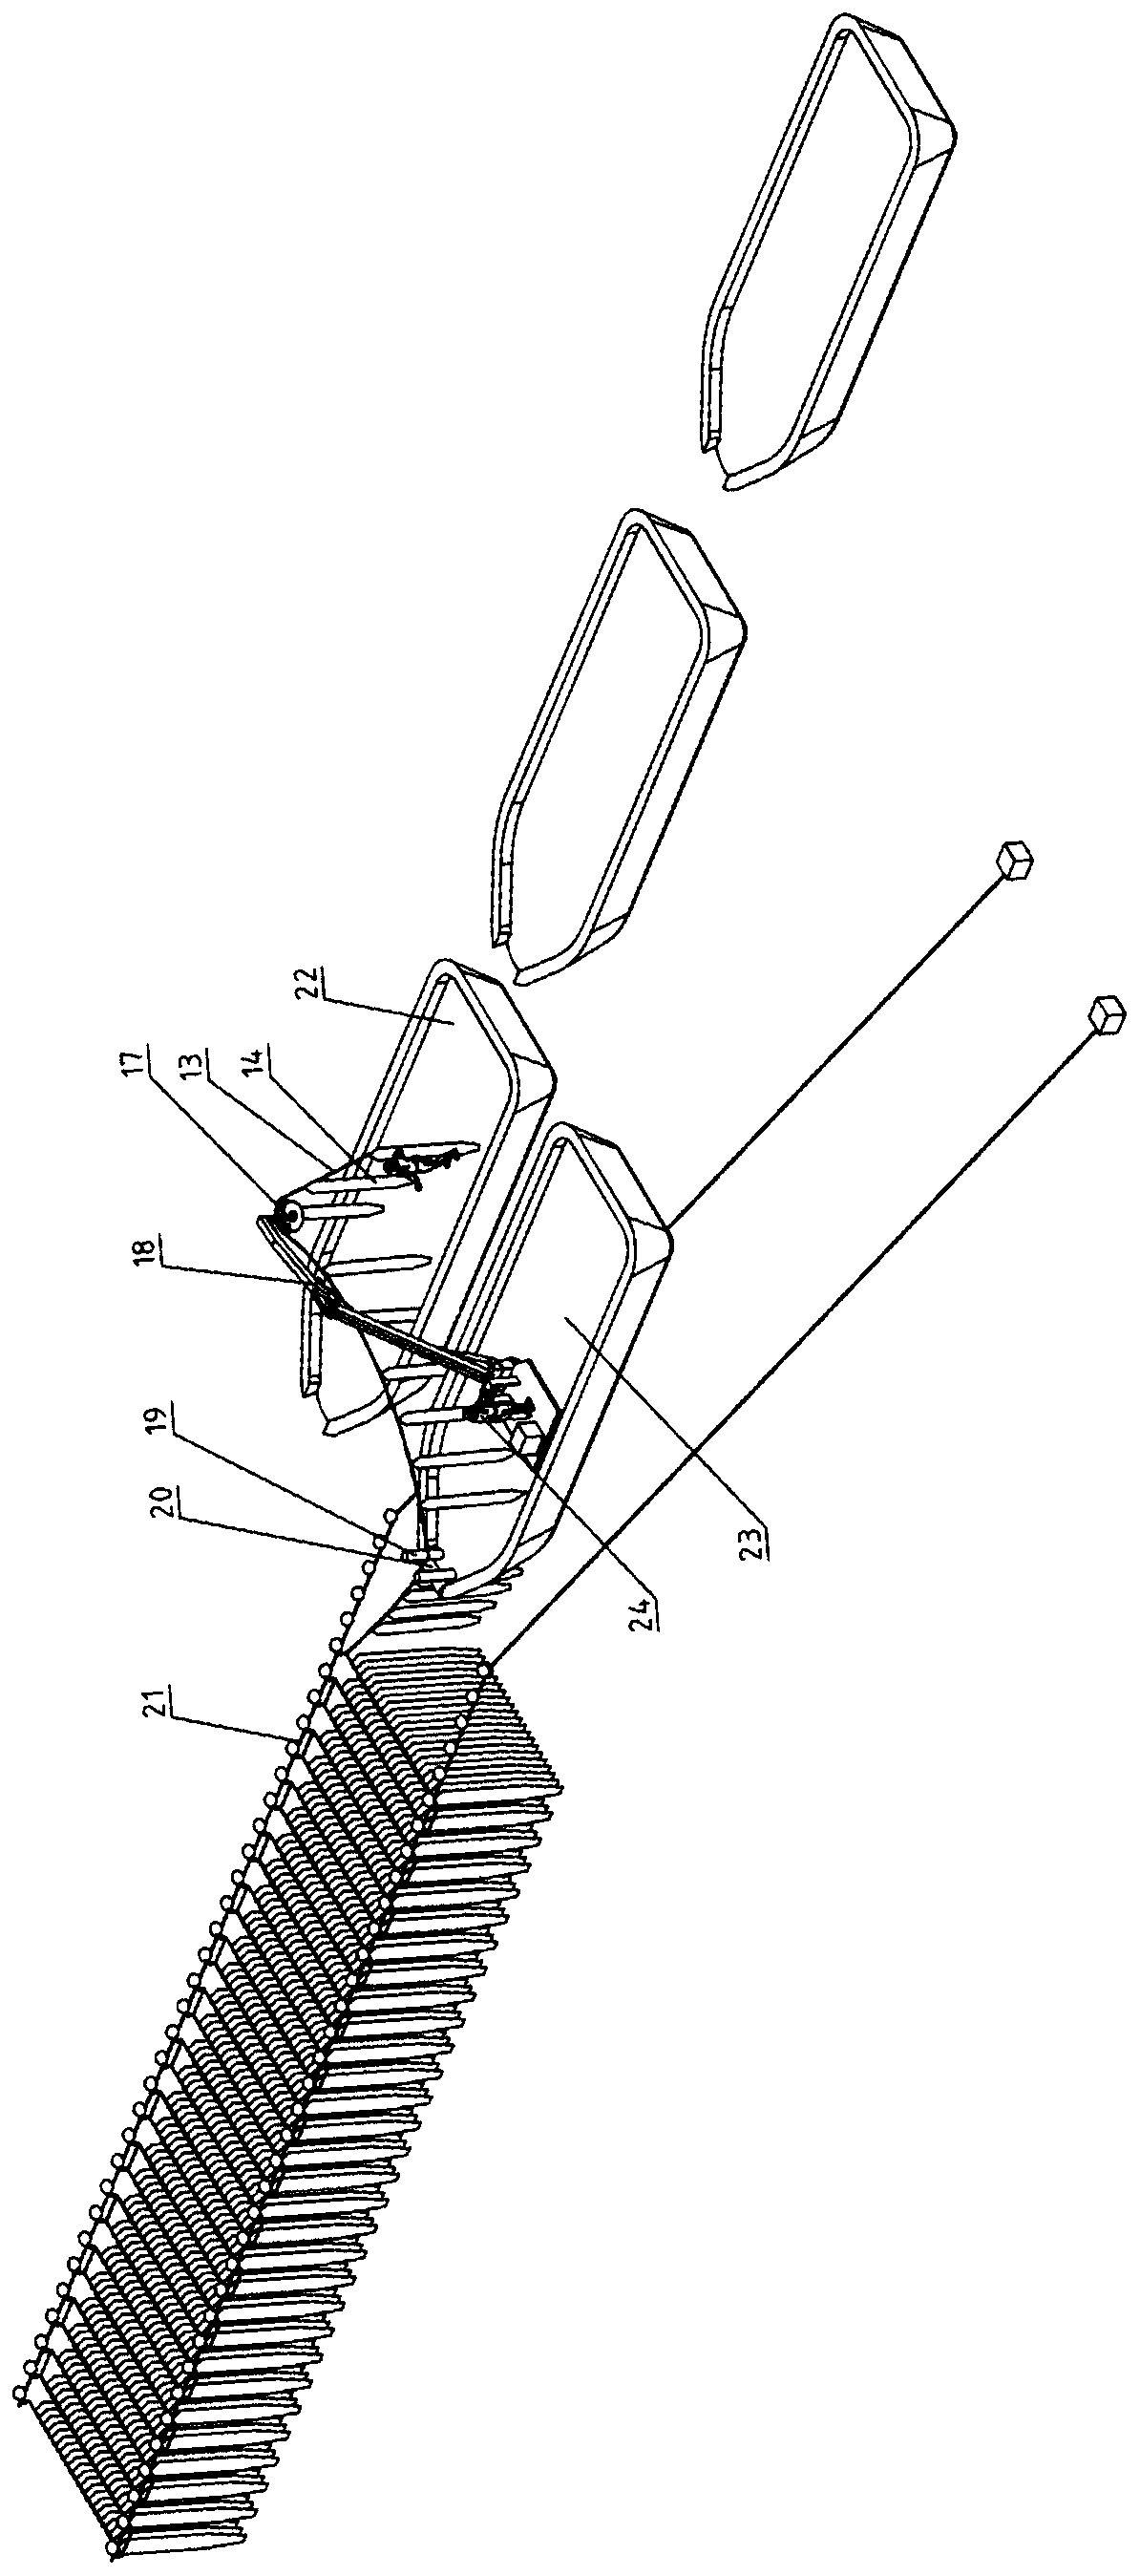 Rotary retractable claw-type raft frame seedling rope harvesting and transferring device and system